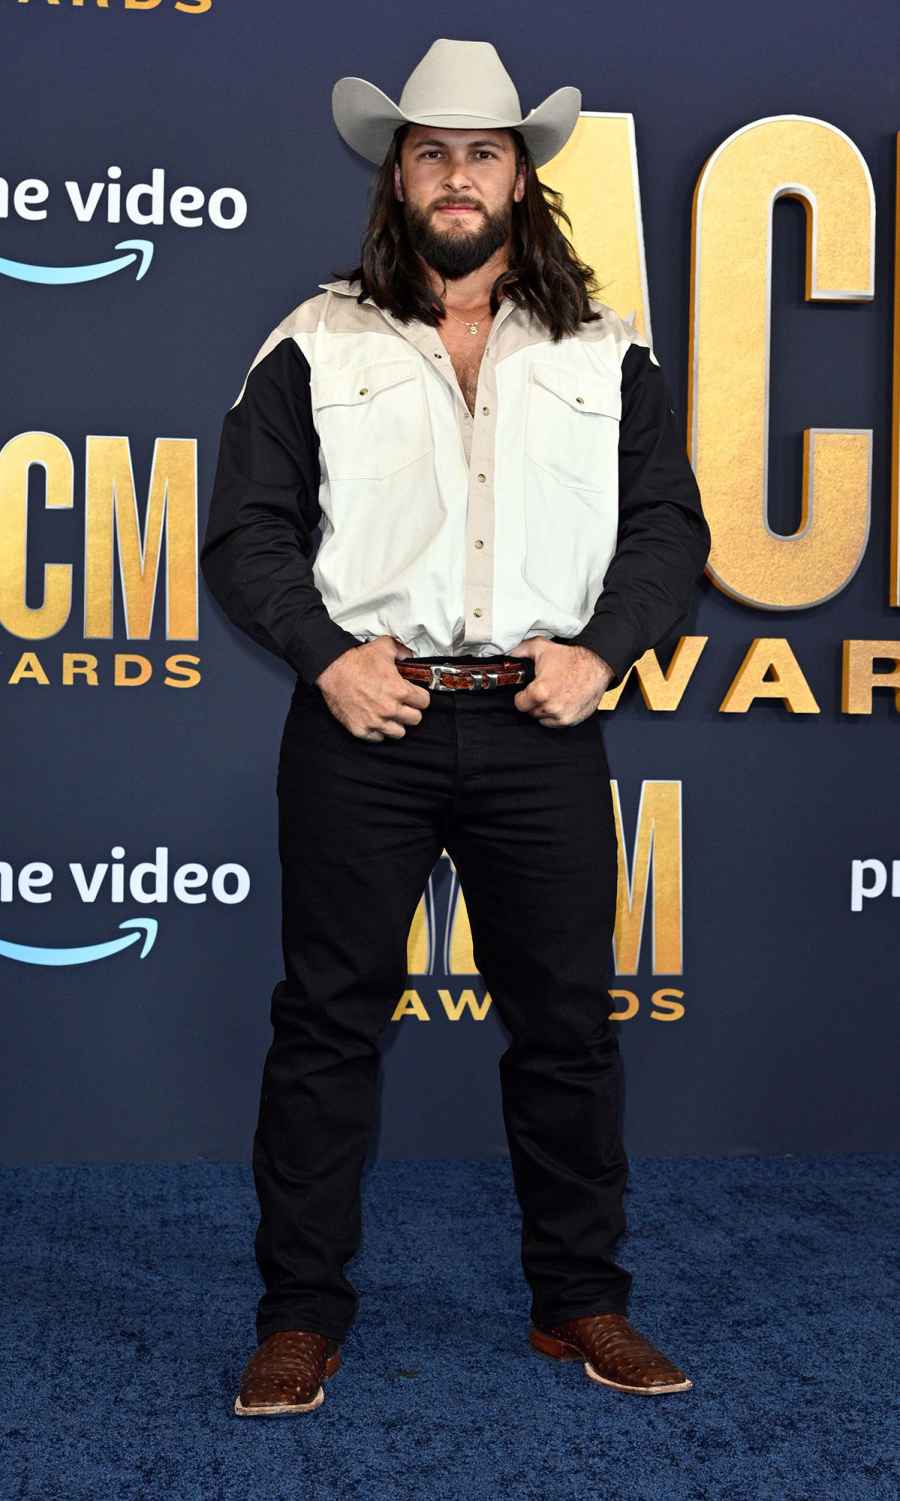 Brock Davies The Best Dressed Hottest Men at the ACM Awards 2022